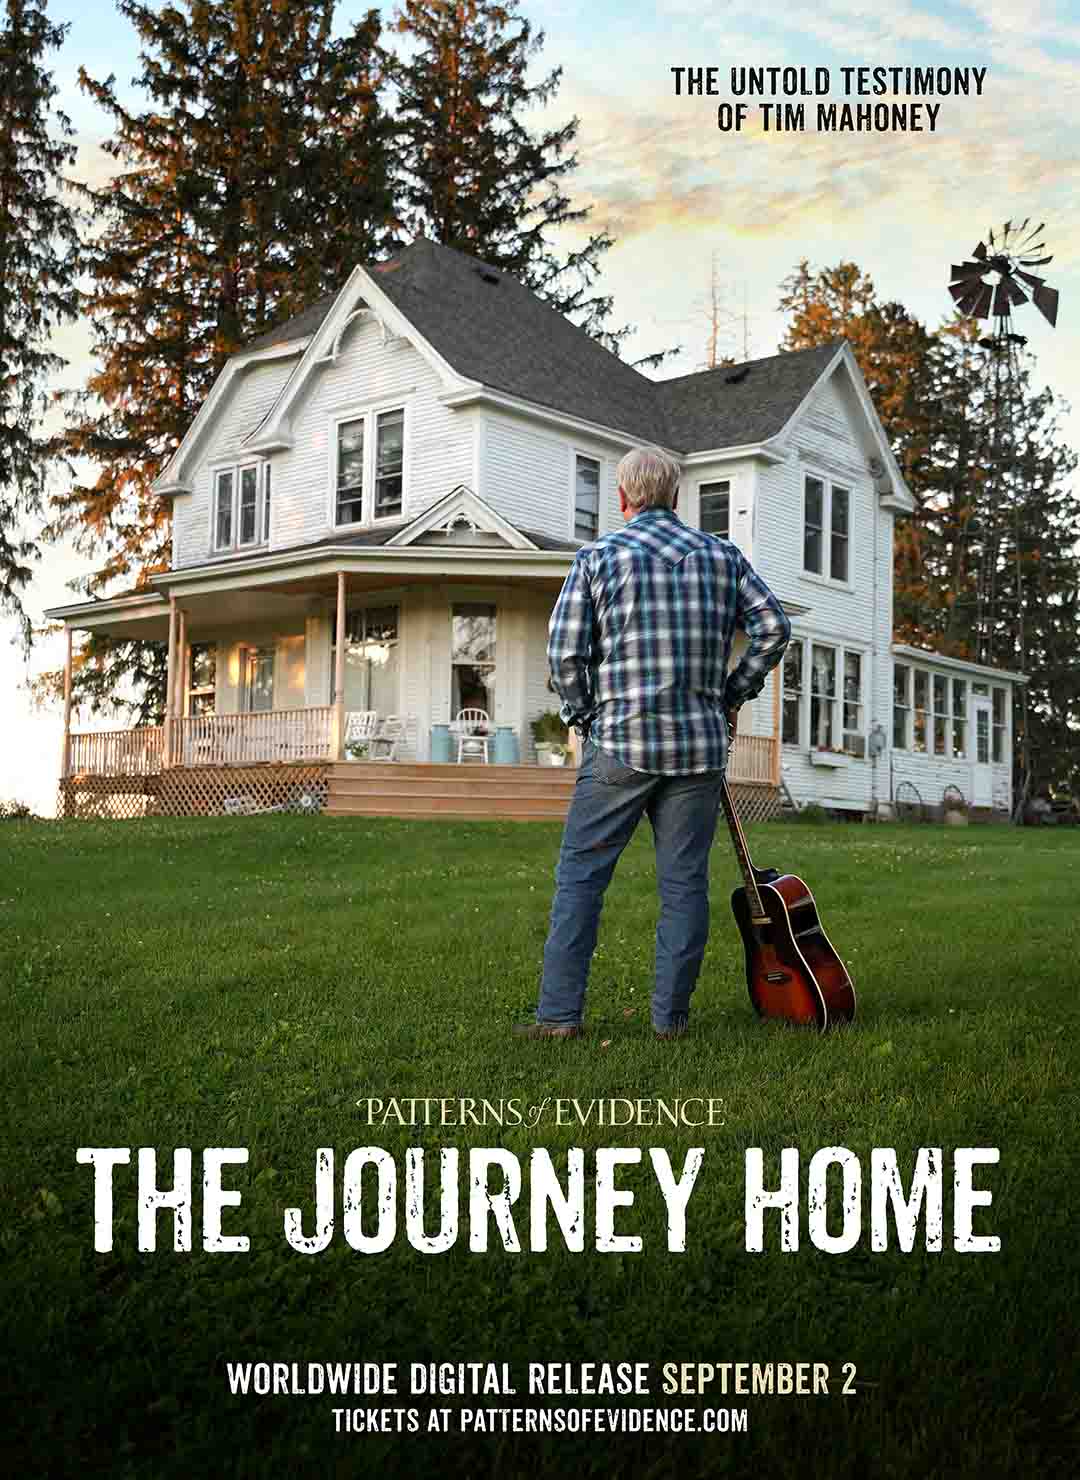 Join the Journey Home The New Film from Patterns of Evidence